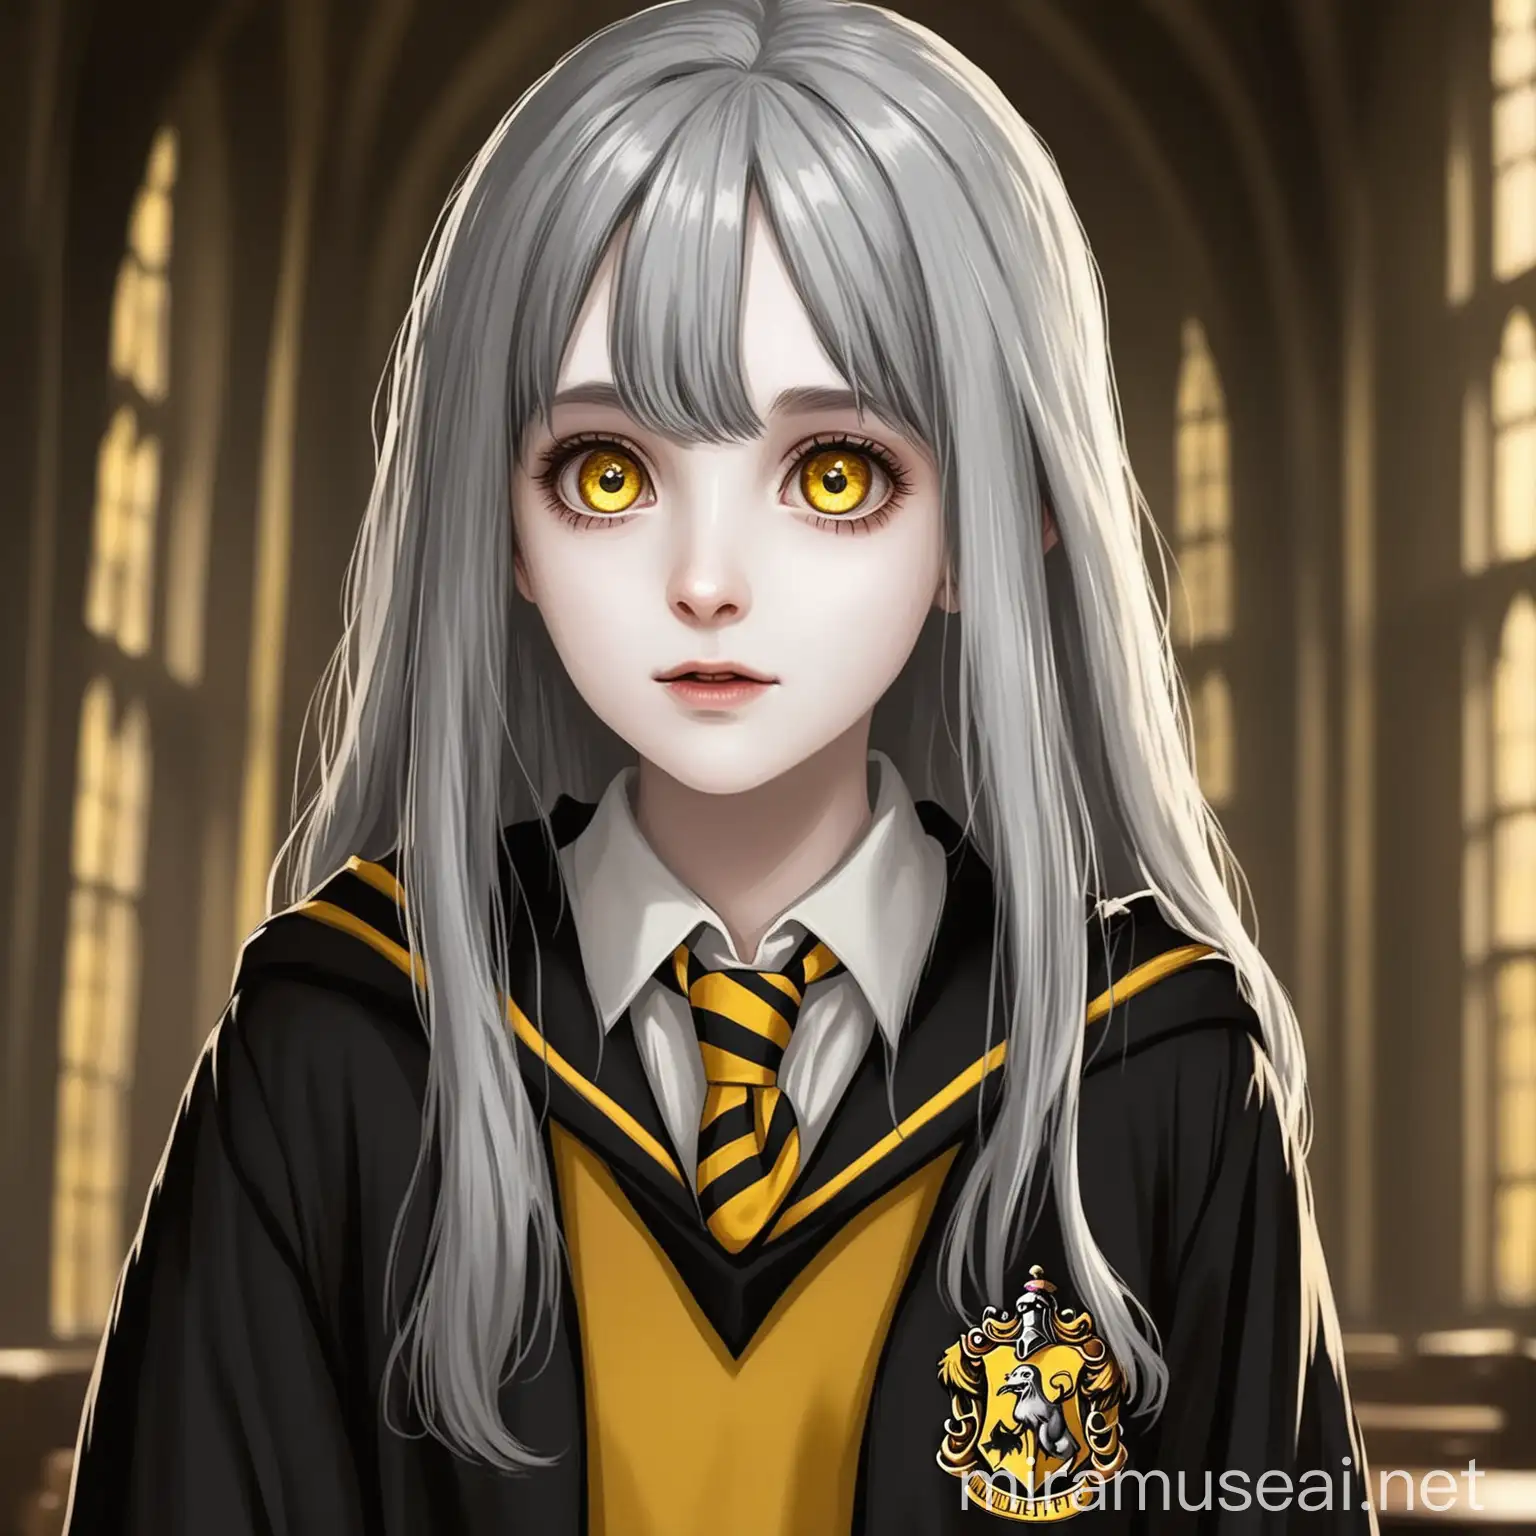 A girl with Gray hair and copper colored eyes and pale skin, wearing the Hogwarts  Hufflepuff school uniform from harry potter.